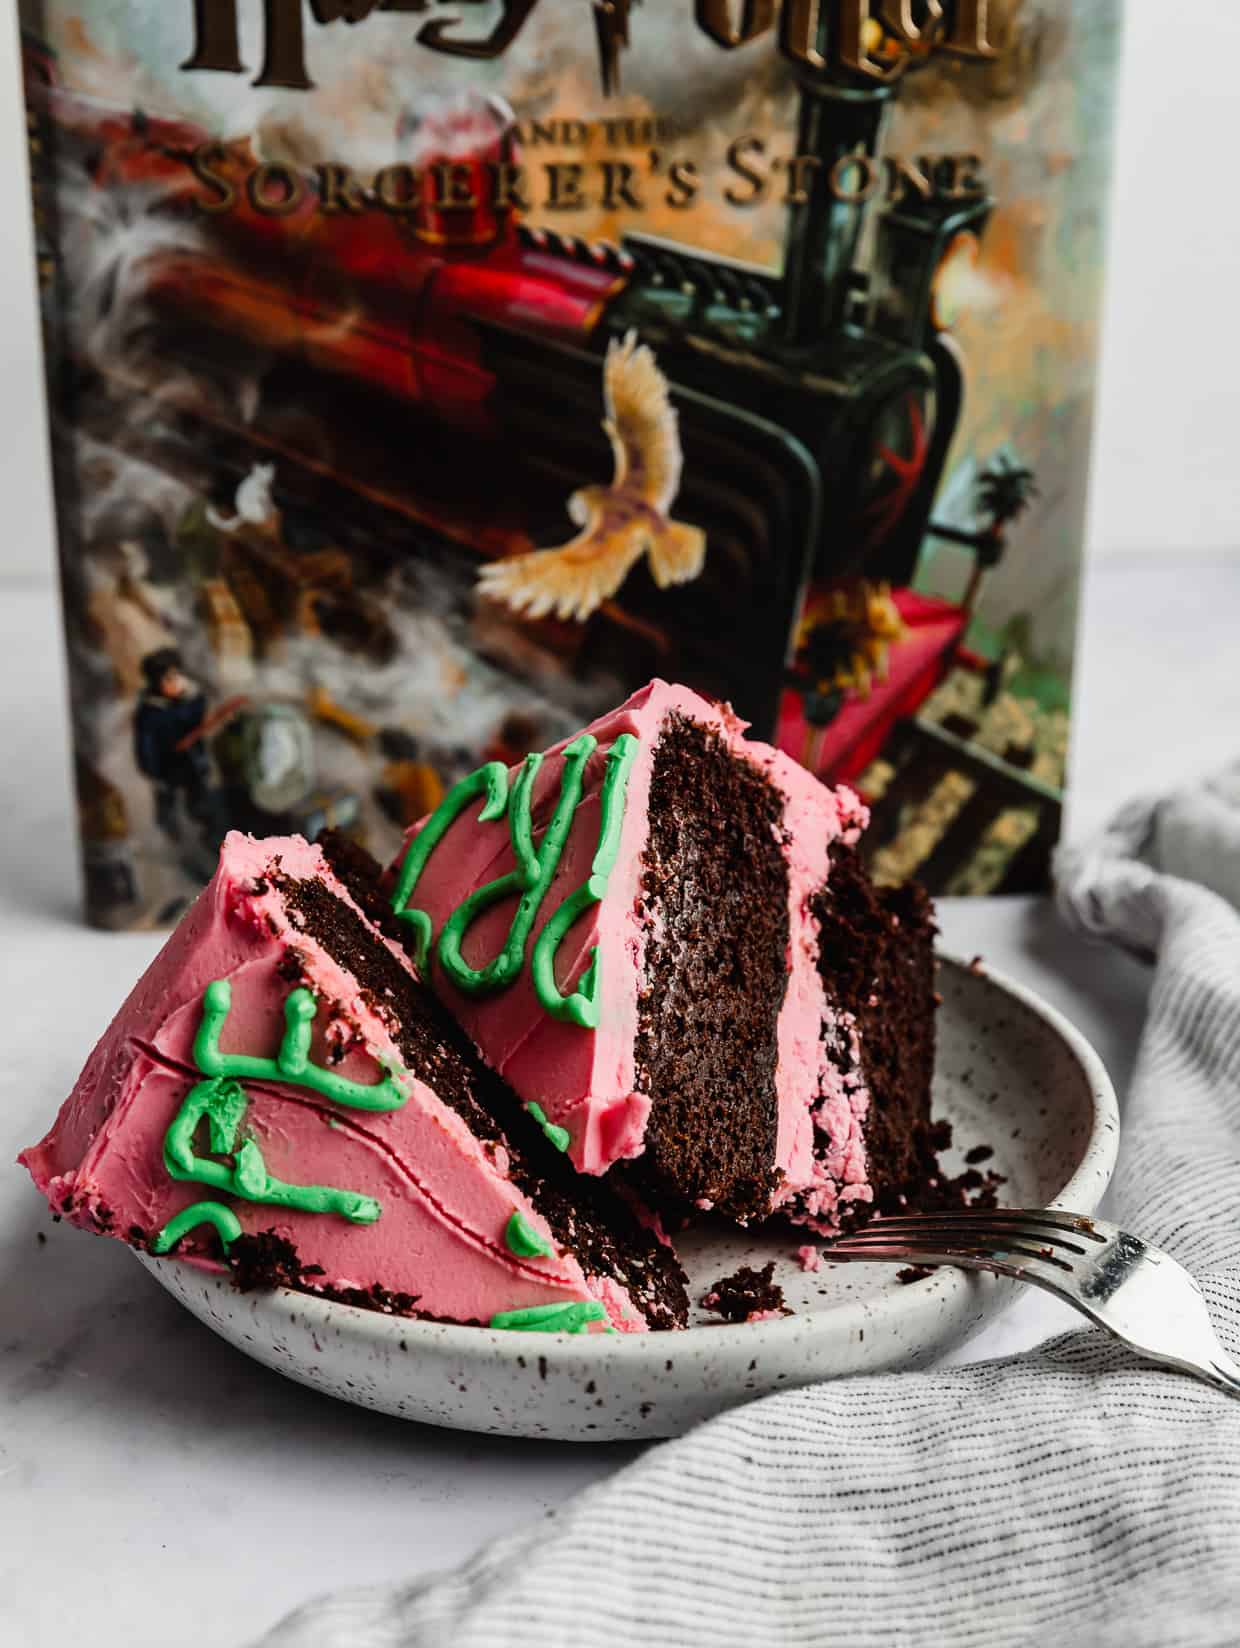 Harry Potters Birthday Cake decorated in pink icing and green lettering, cut into wedges on a white plate with a Harry Potter book in the background.